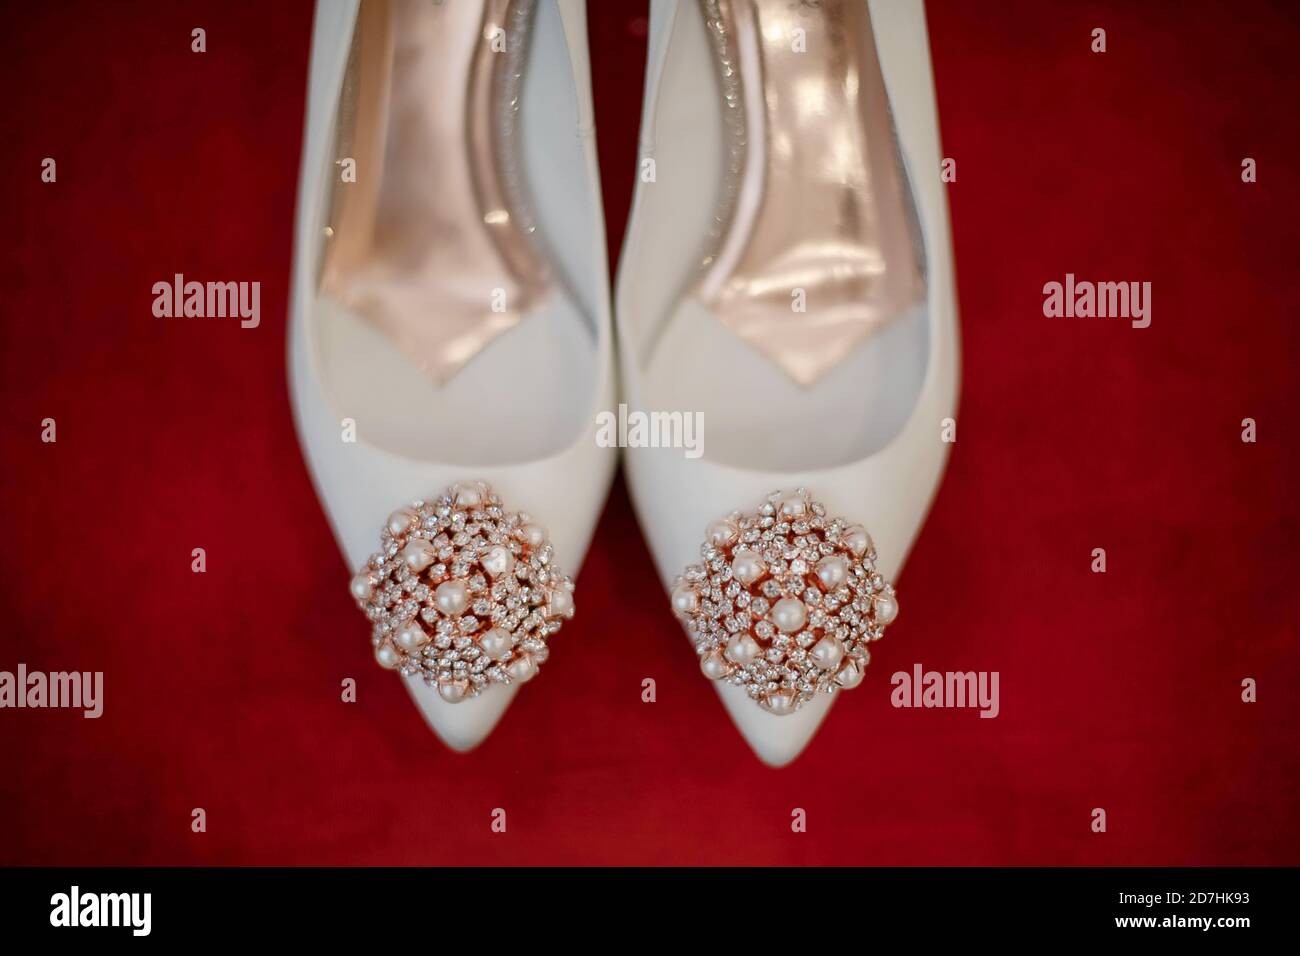 Close-up of beautiful white bridal pair of shoes embellished with pearls and crystal beads, set on a vivid red cushion, elegant leather footwear Stock Photo